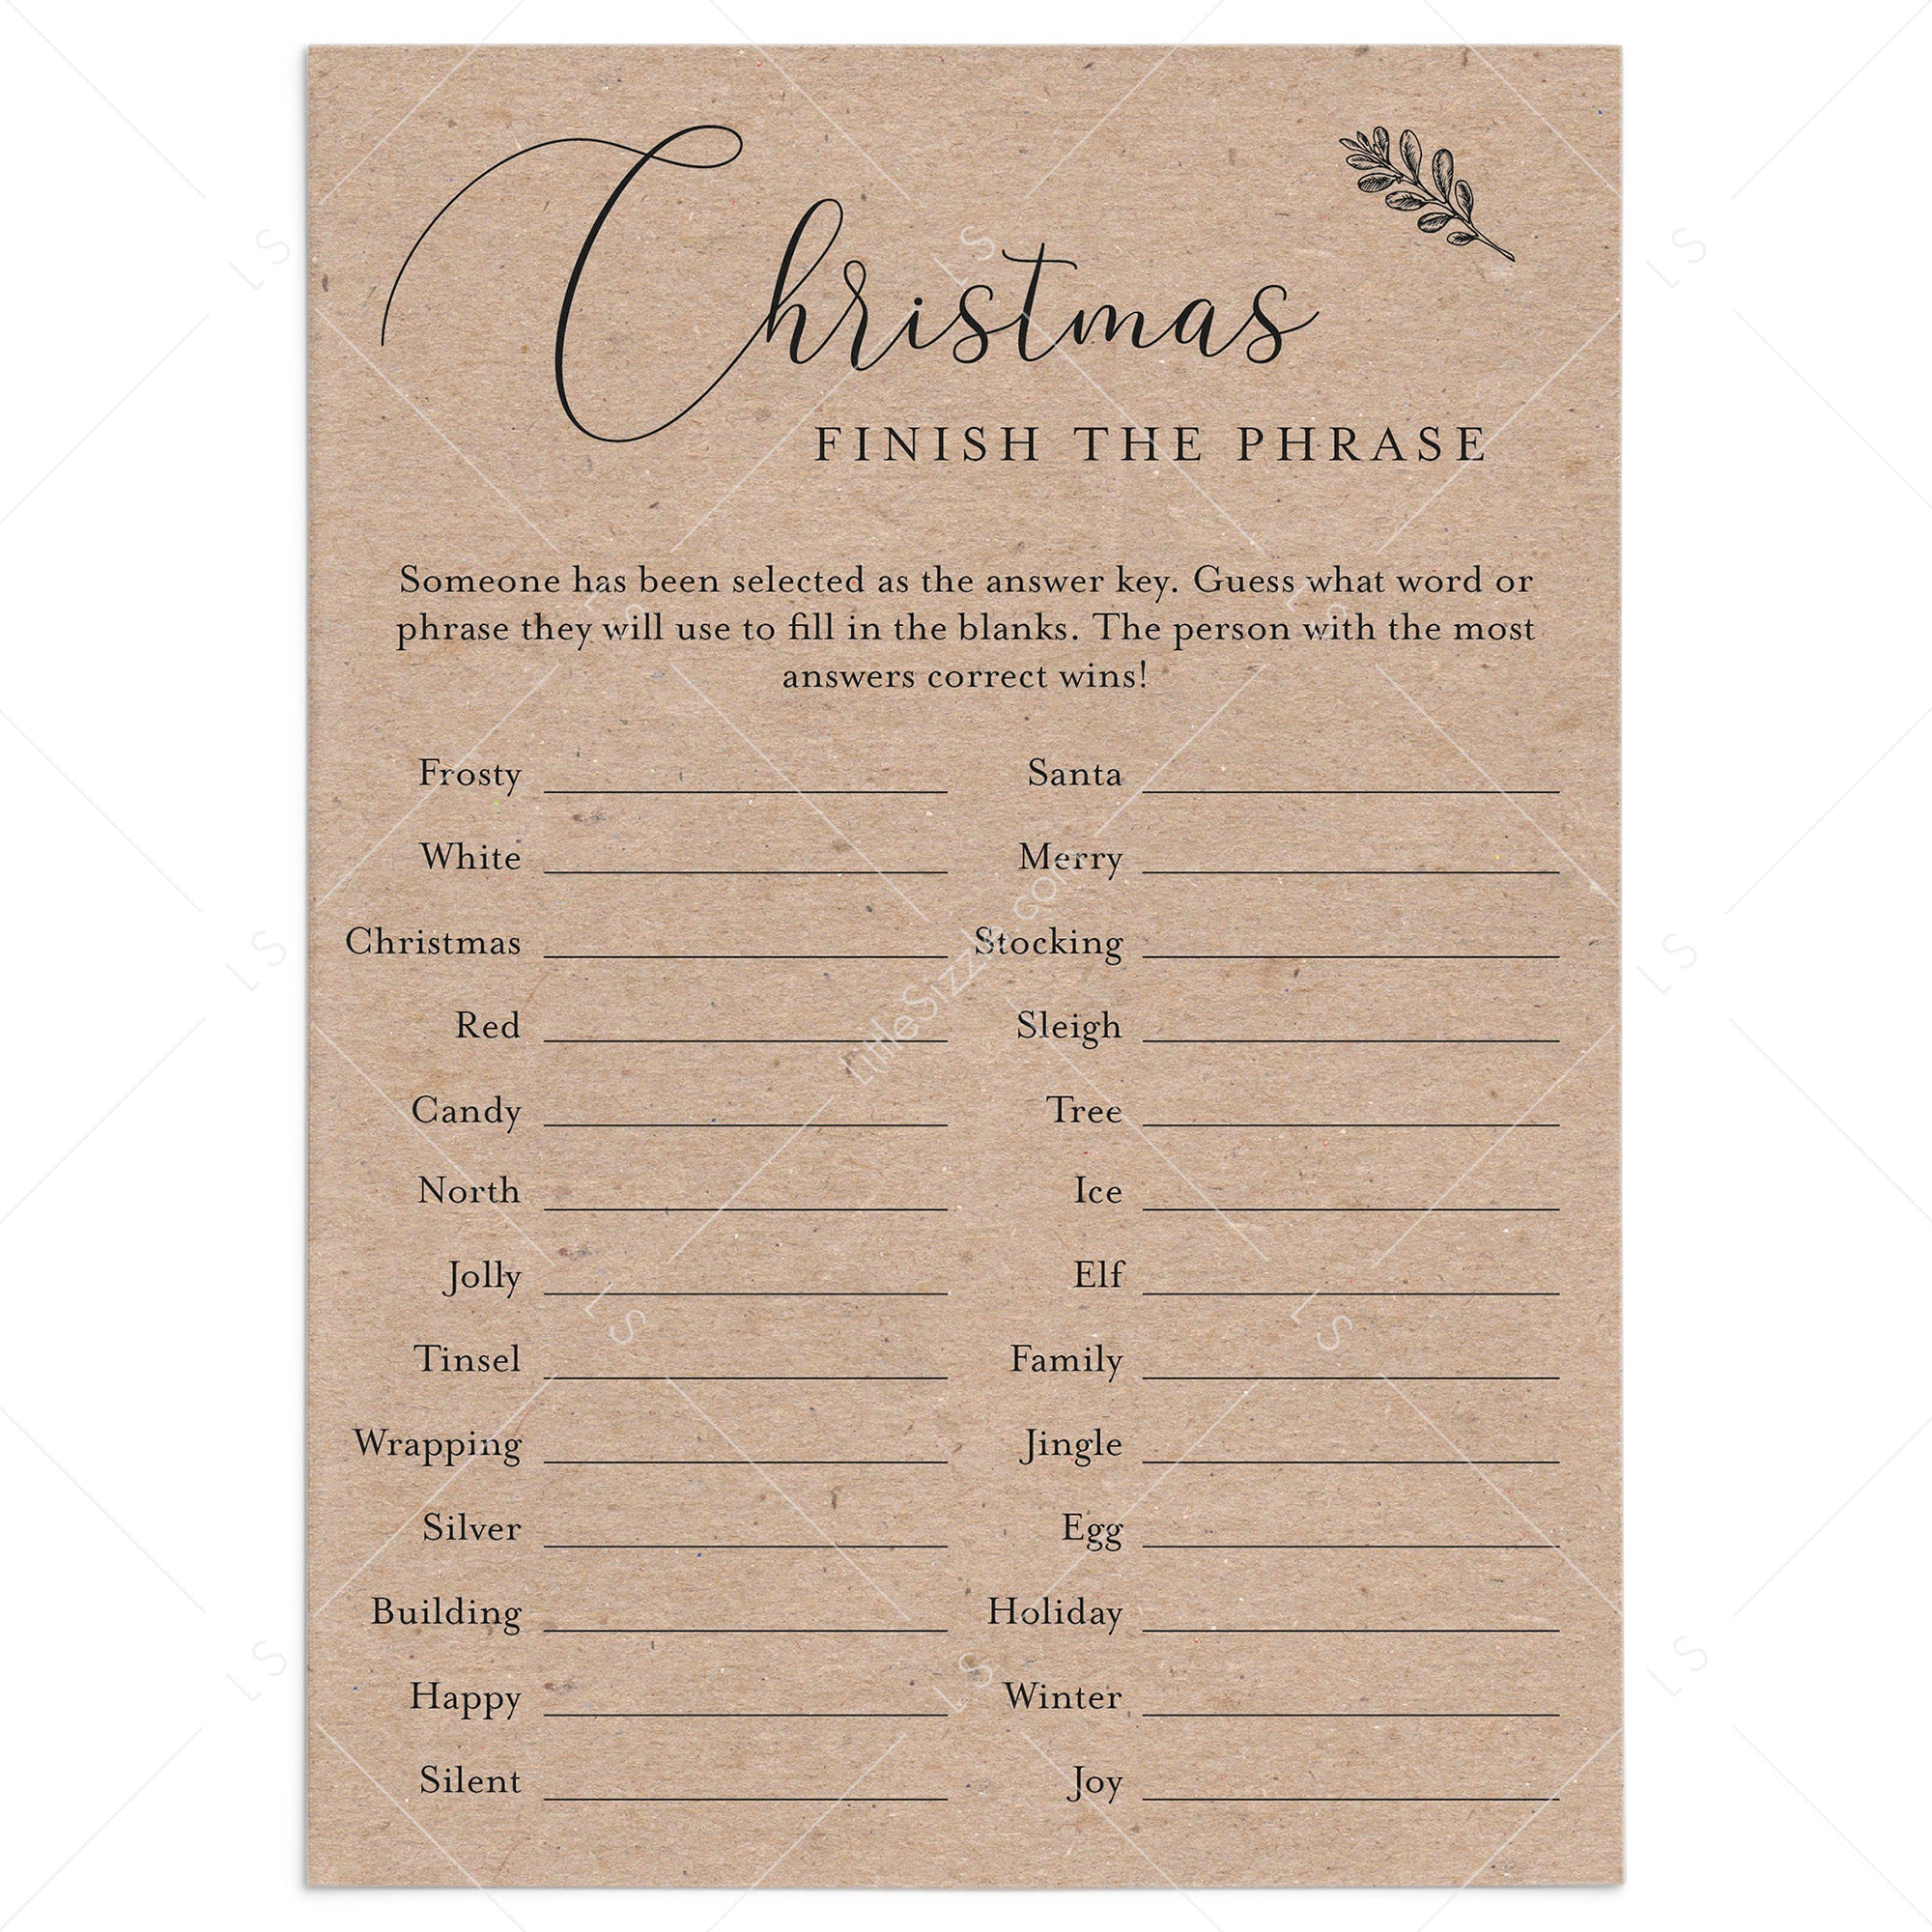 Christmas Office Party Game Finish The Phrase Printable – LittleSizzle